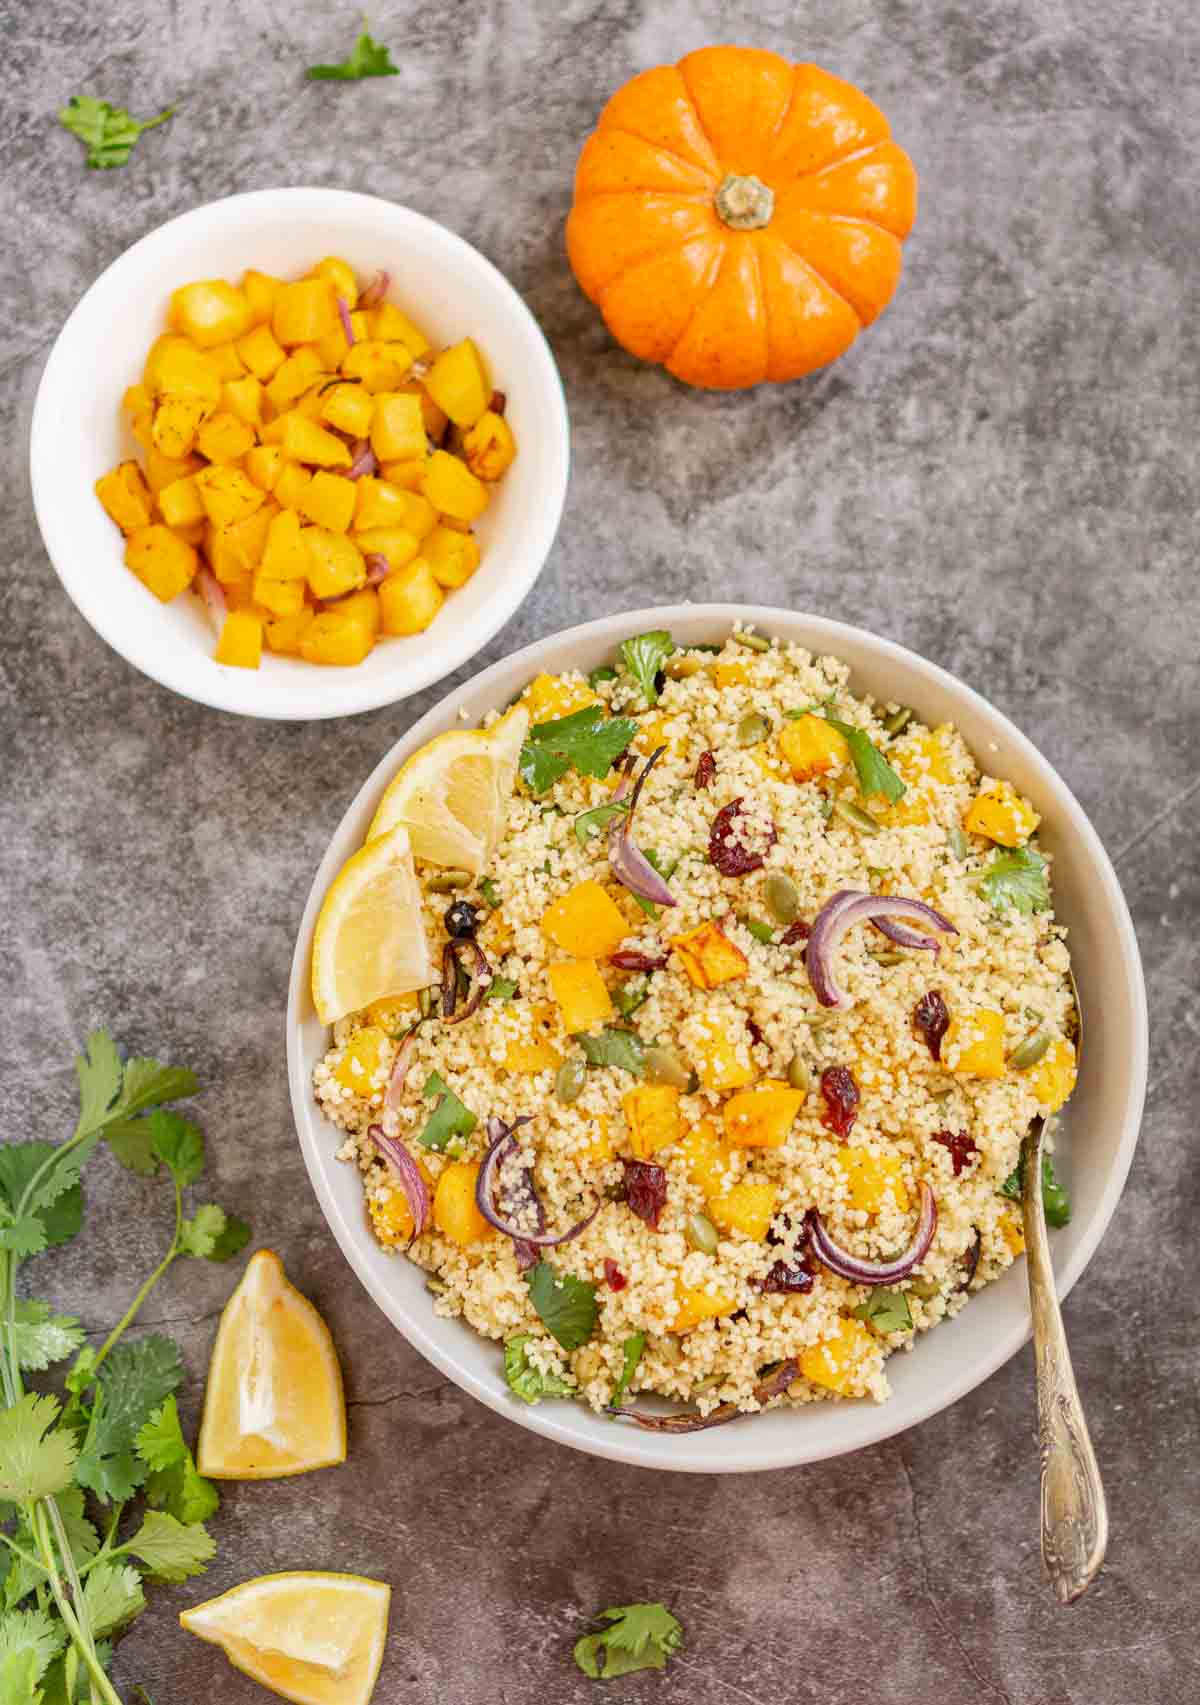 Bowl of pumpkin couscous salad with a bowl of roasted cubed pumpkin next to it.